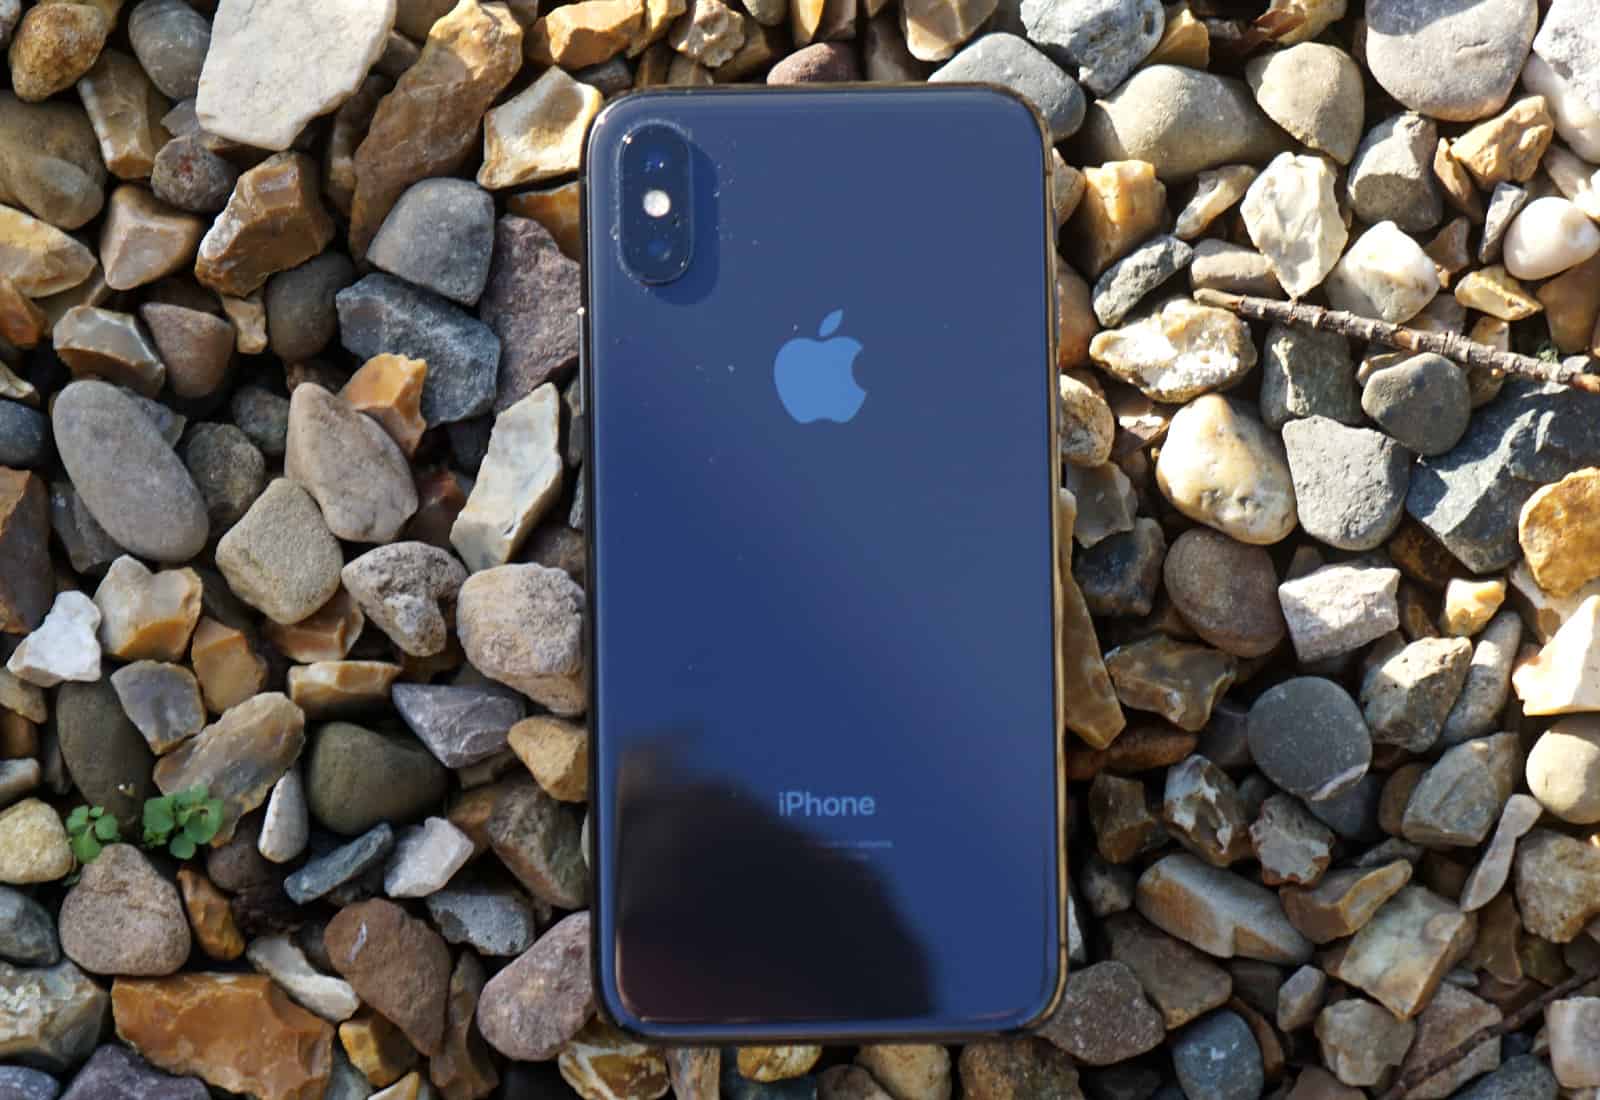 IPhone 10 XR Dimensions: Understanding The Height Of IPhone 10 XR